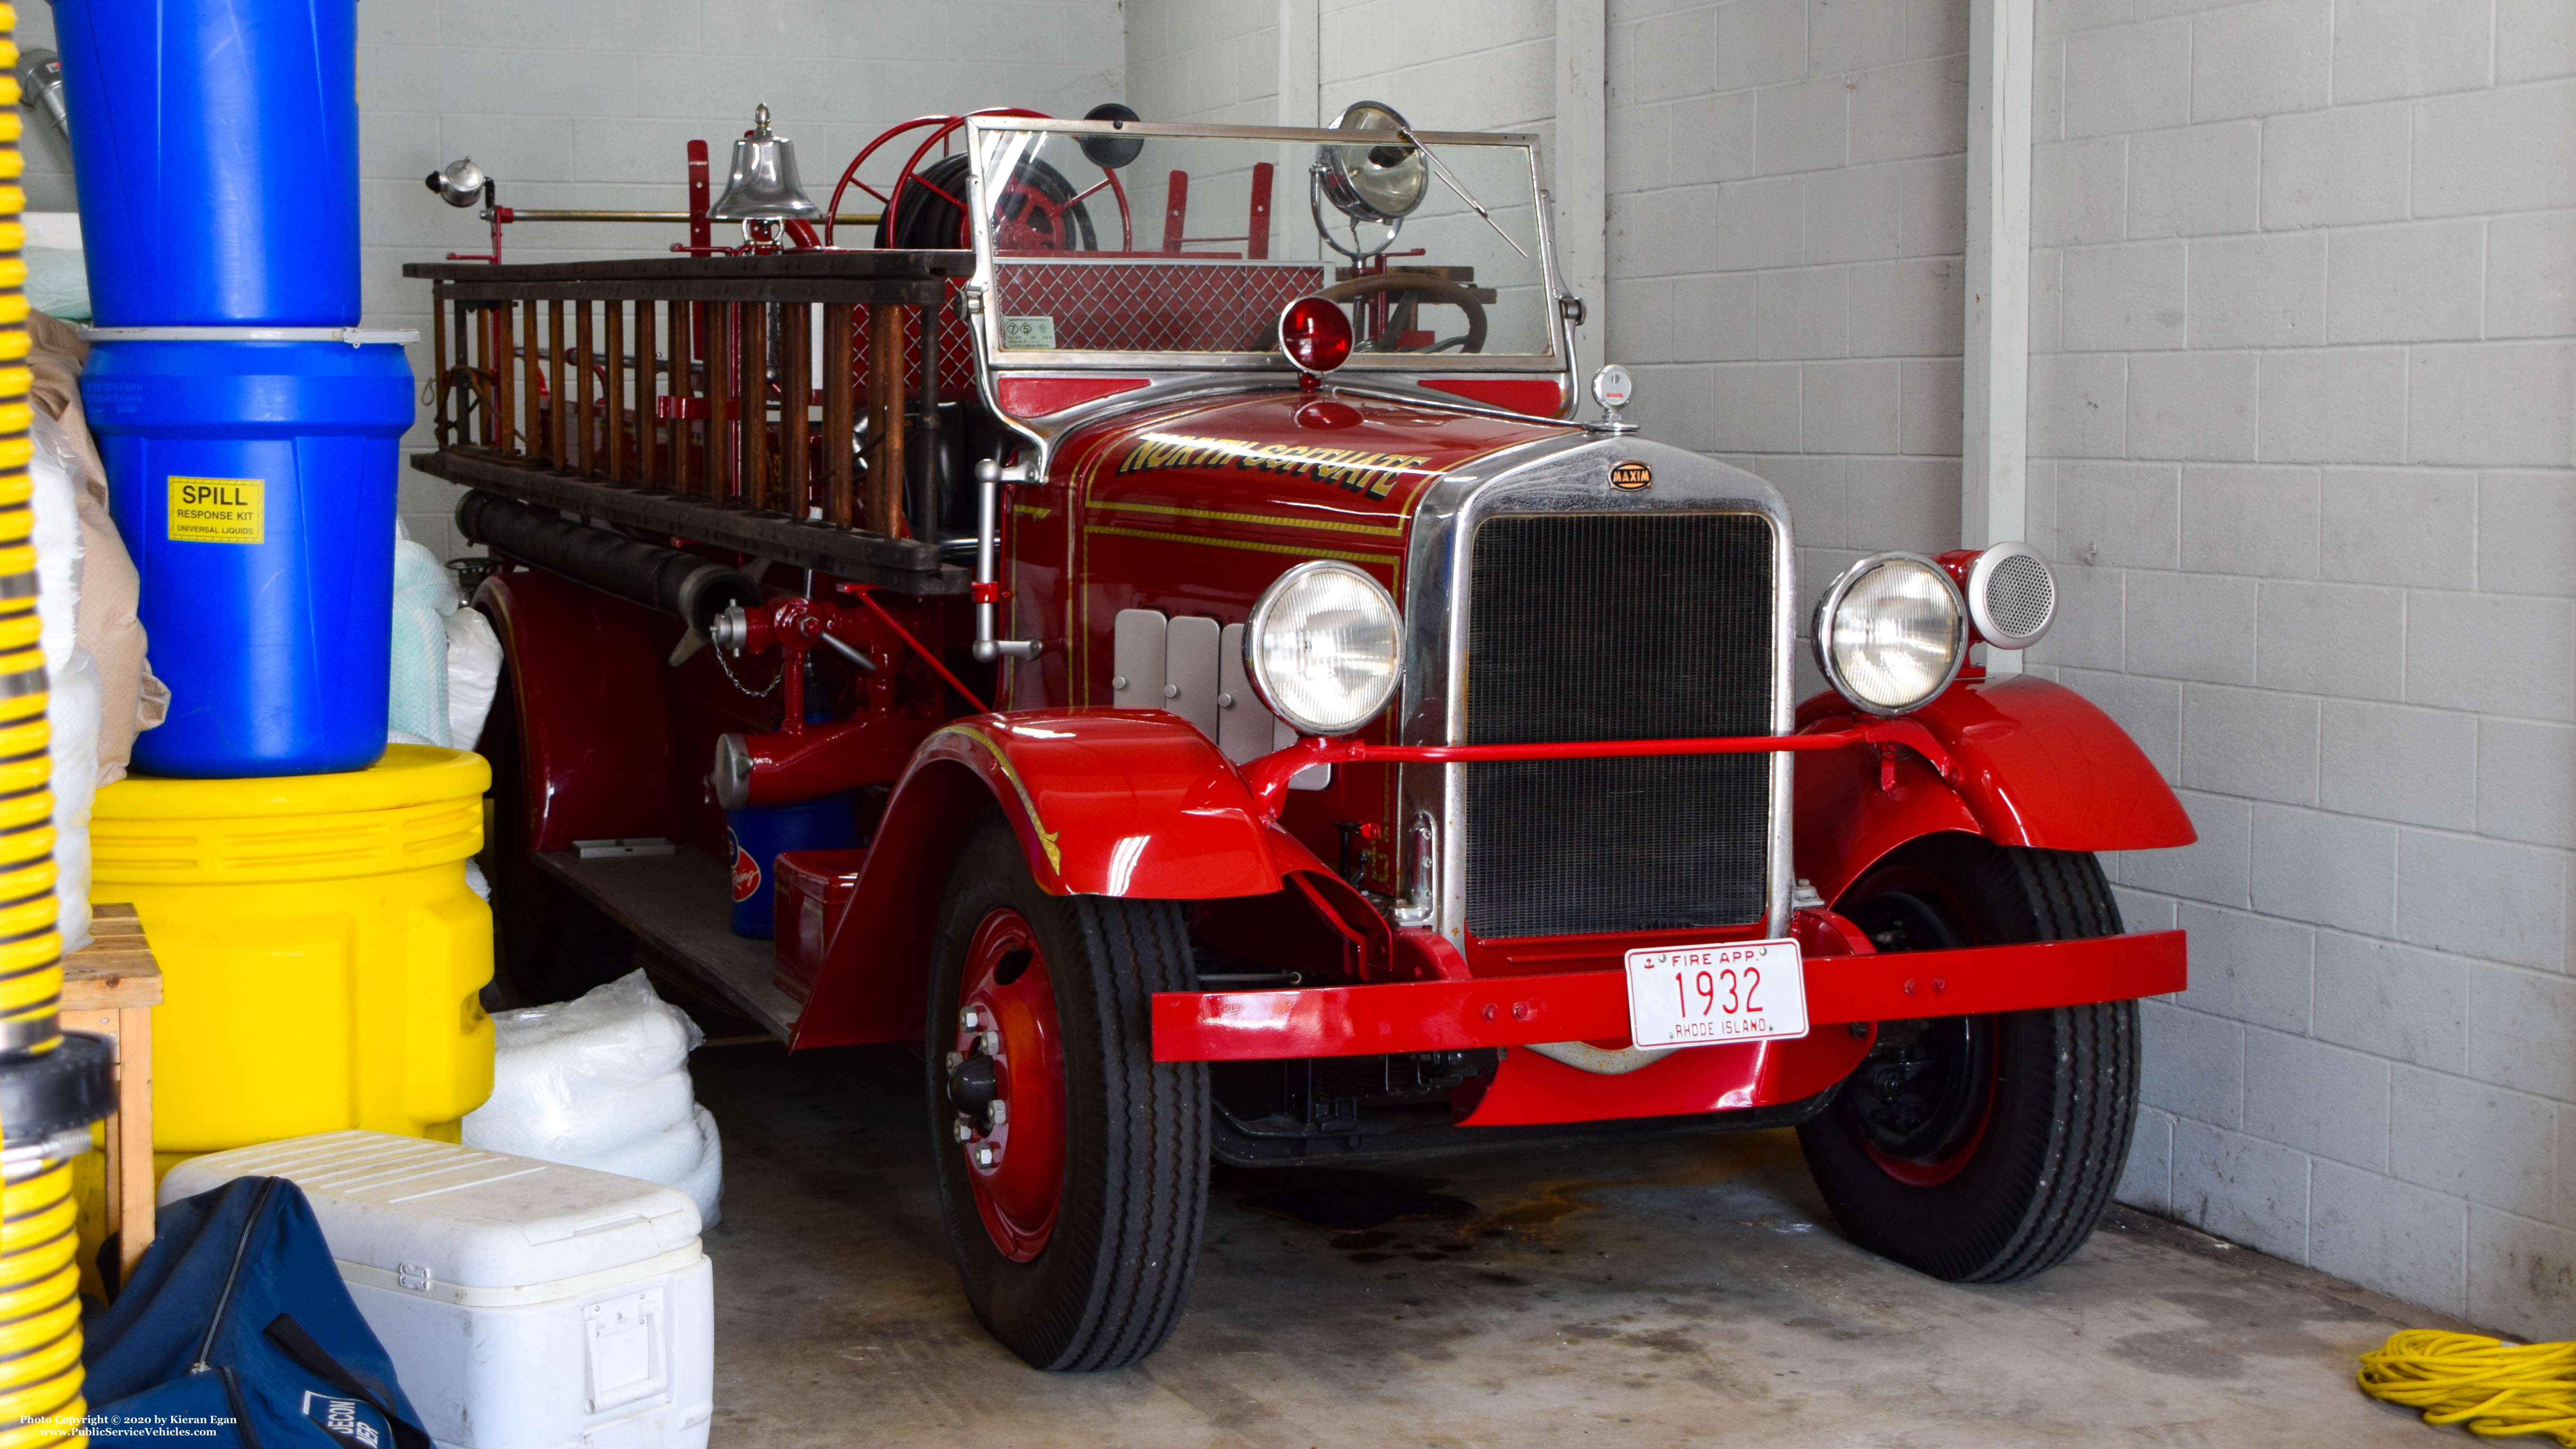 A photo  of North Scituate Fire District
            Antique Engine 2, a 1932 Maxim             taken by Kieran Egan